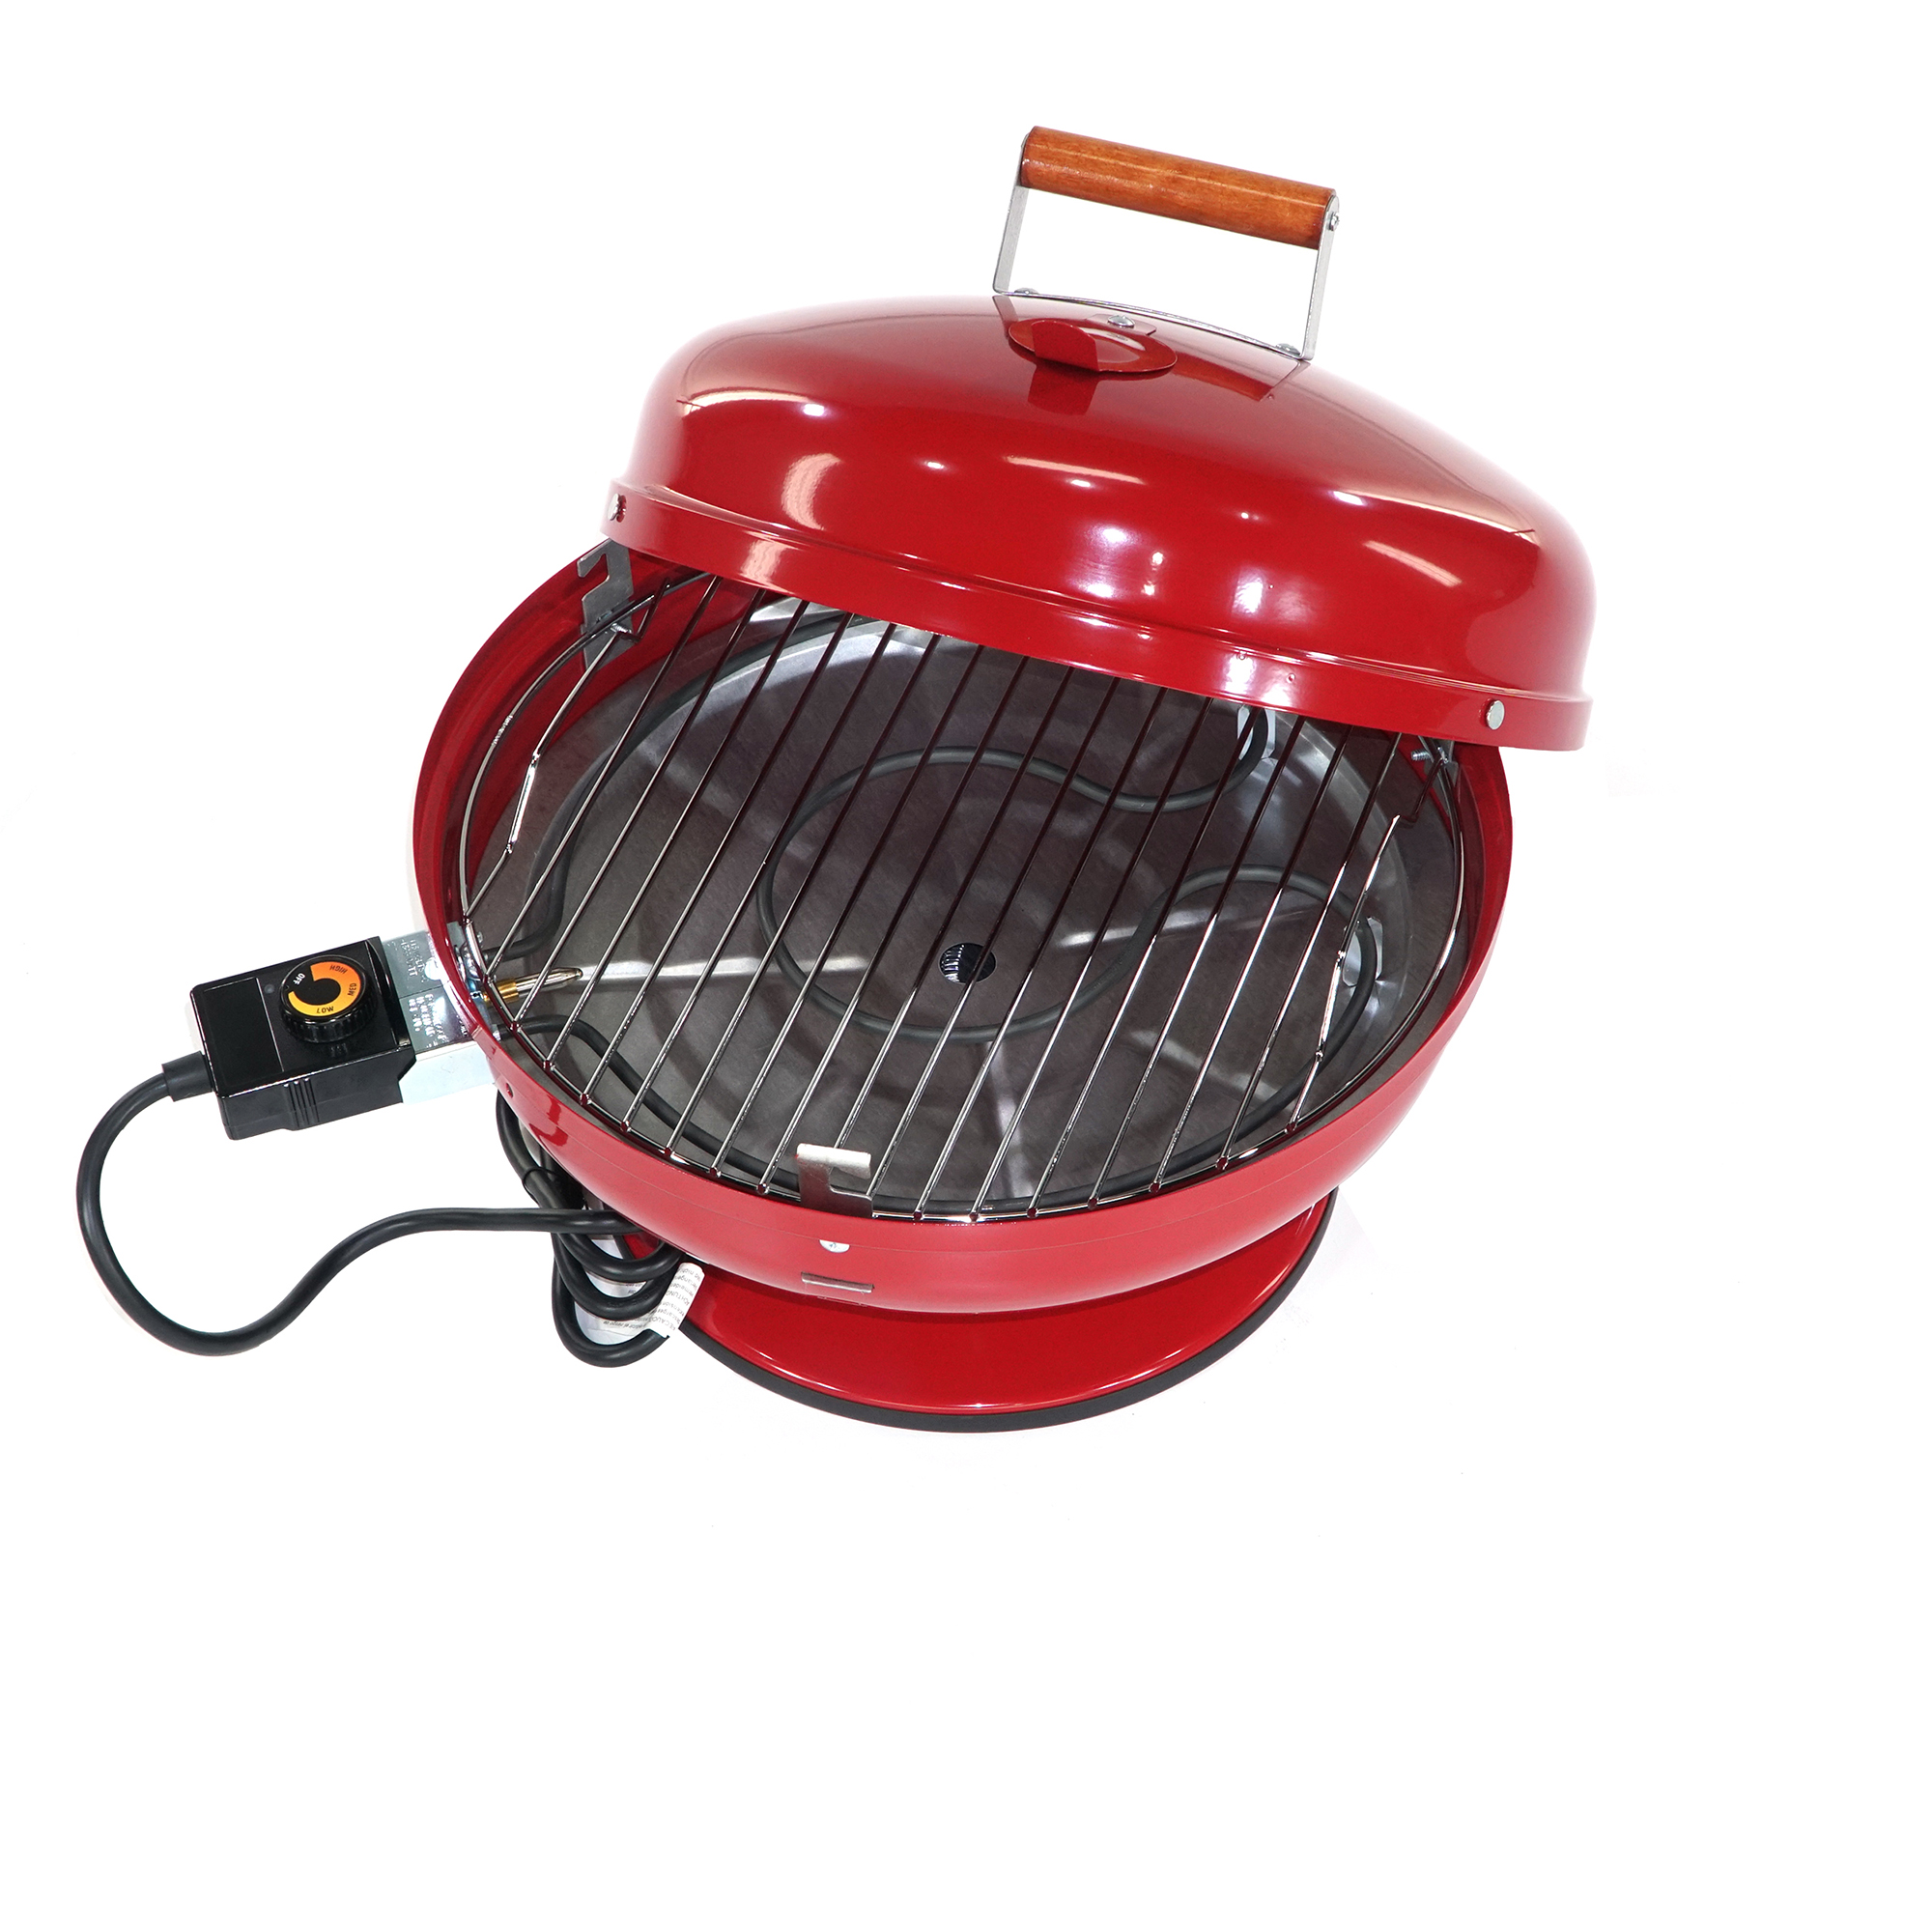 Americana Lock 'N Go Portable Electric Grill - Red - image 2 of 8